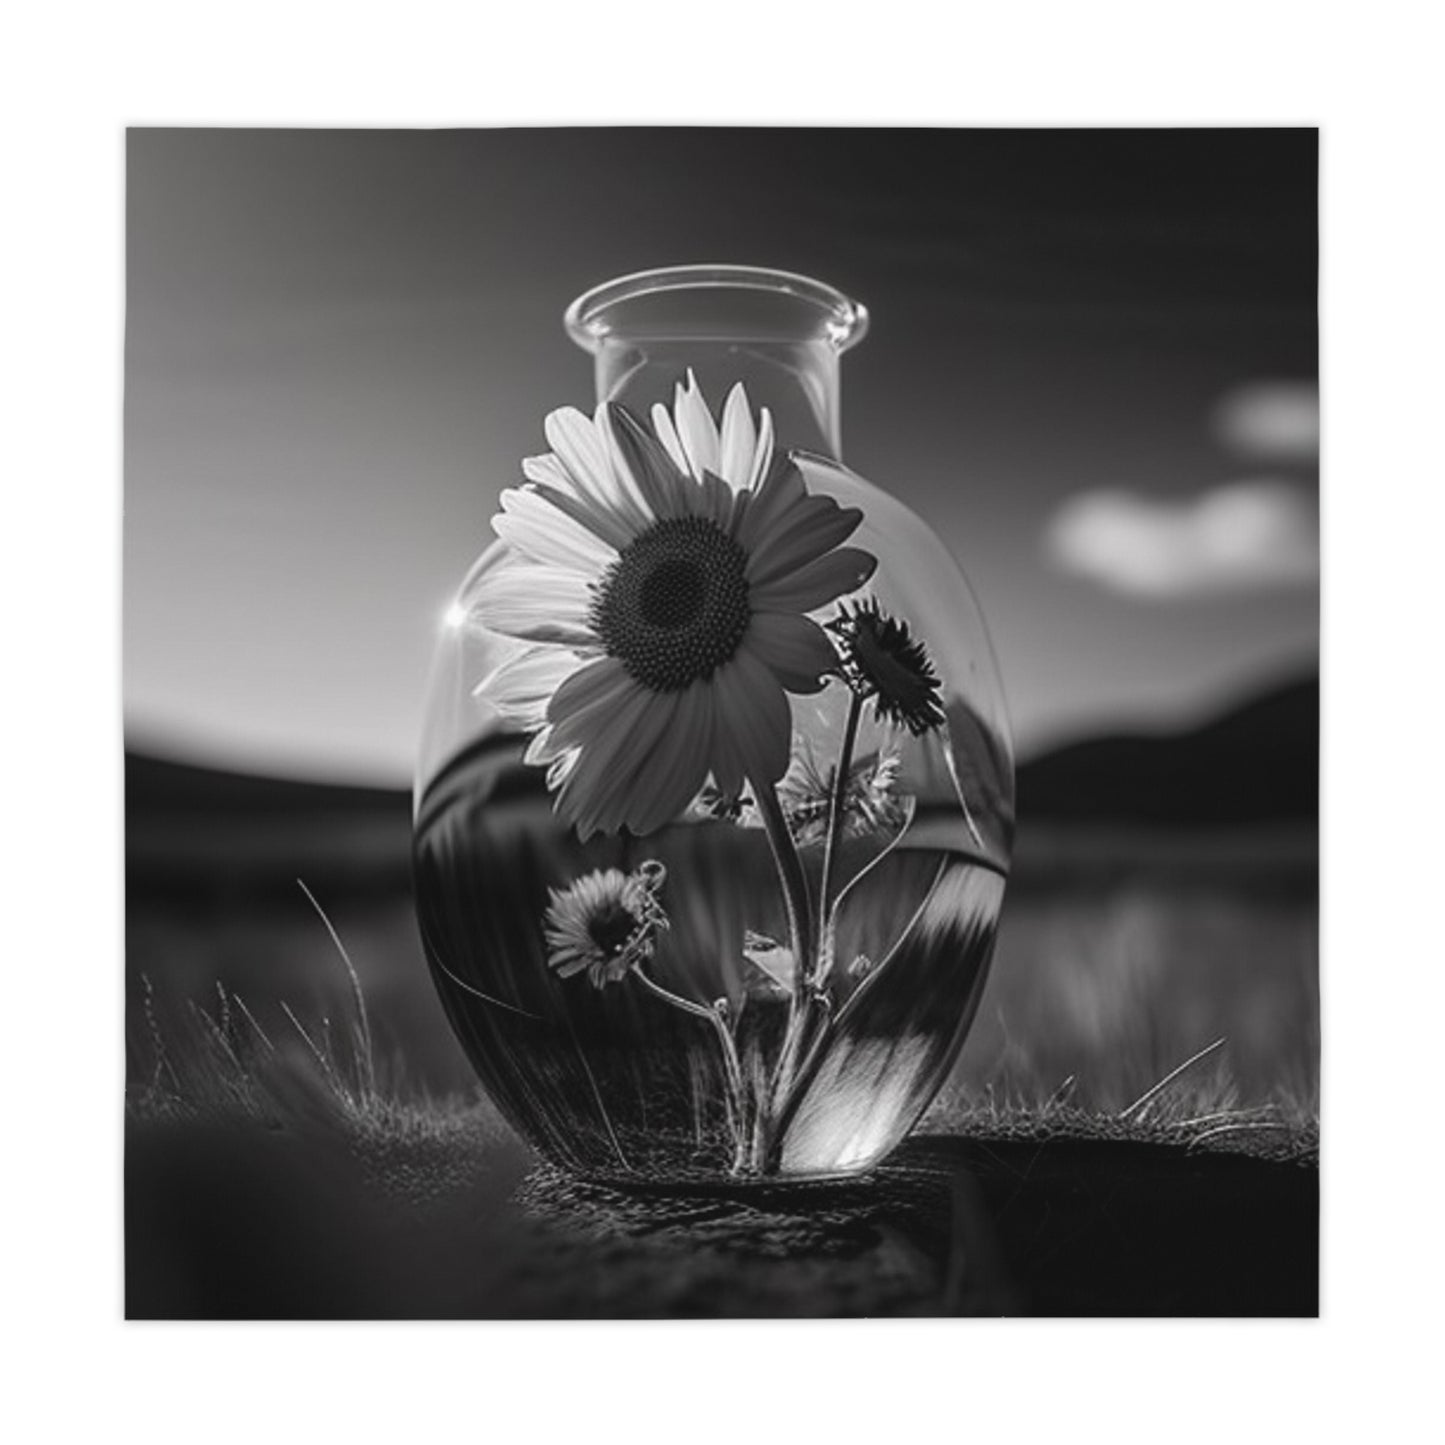 Tablecloth Yellw Sunflower in a vase 4